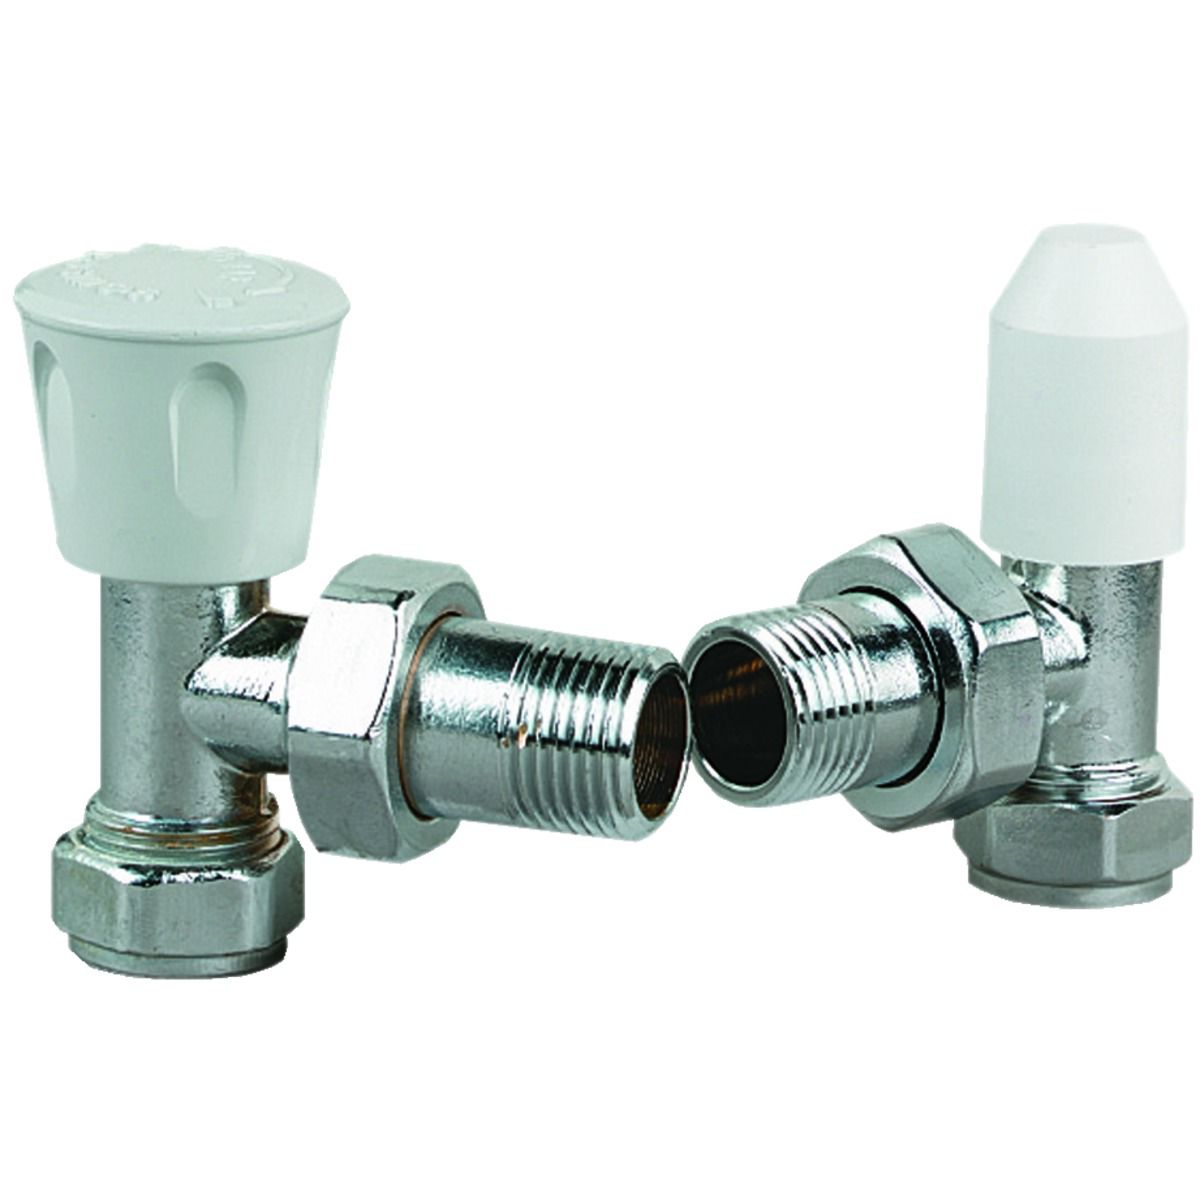 Image of Primaflow 15mm Angled Thermostatic Radiator Valves - Chrome - Pack of 2